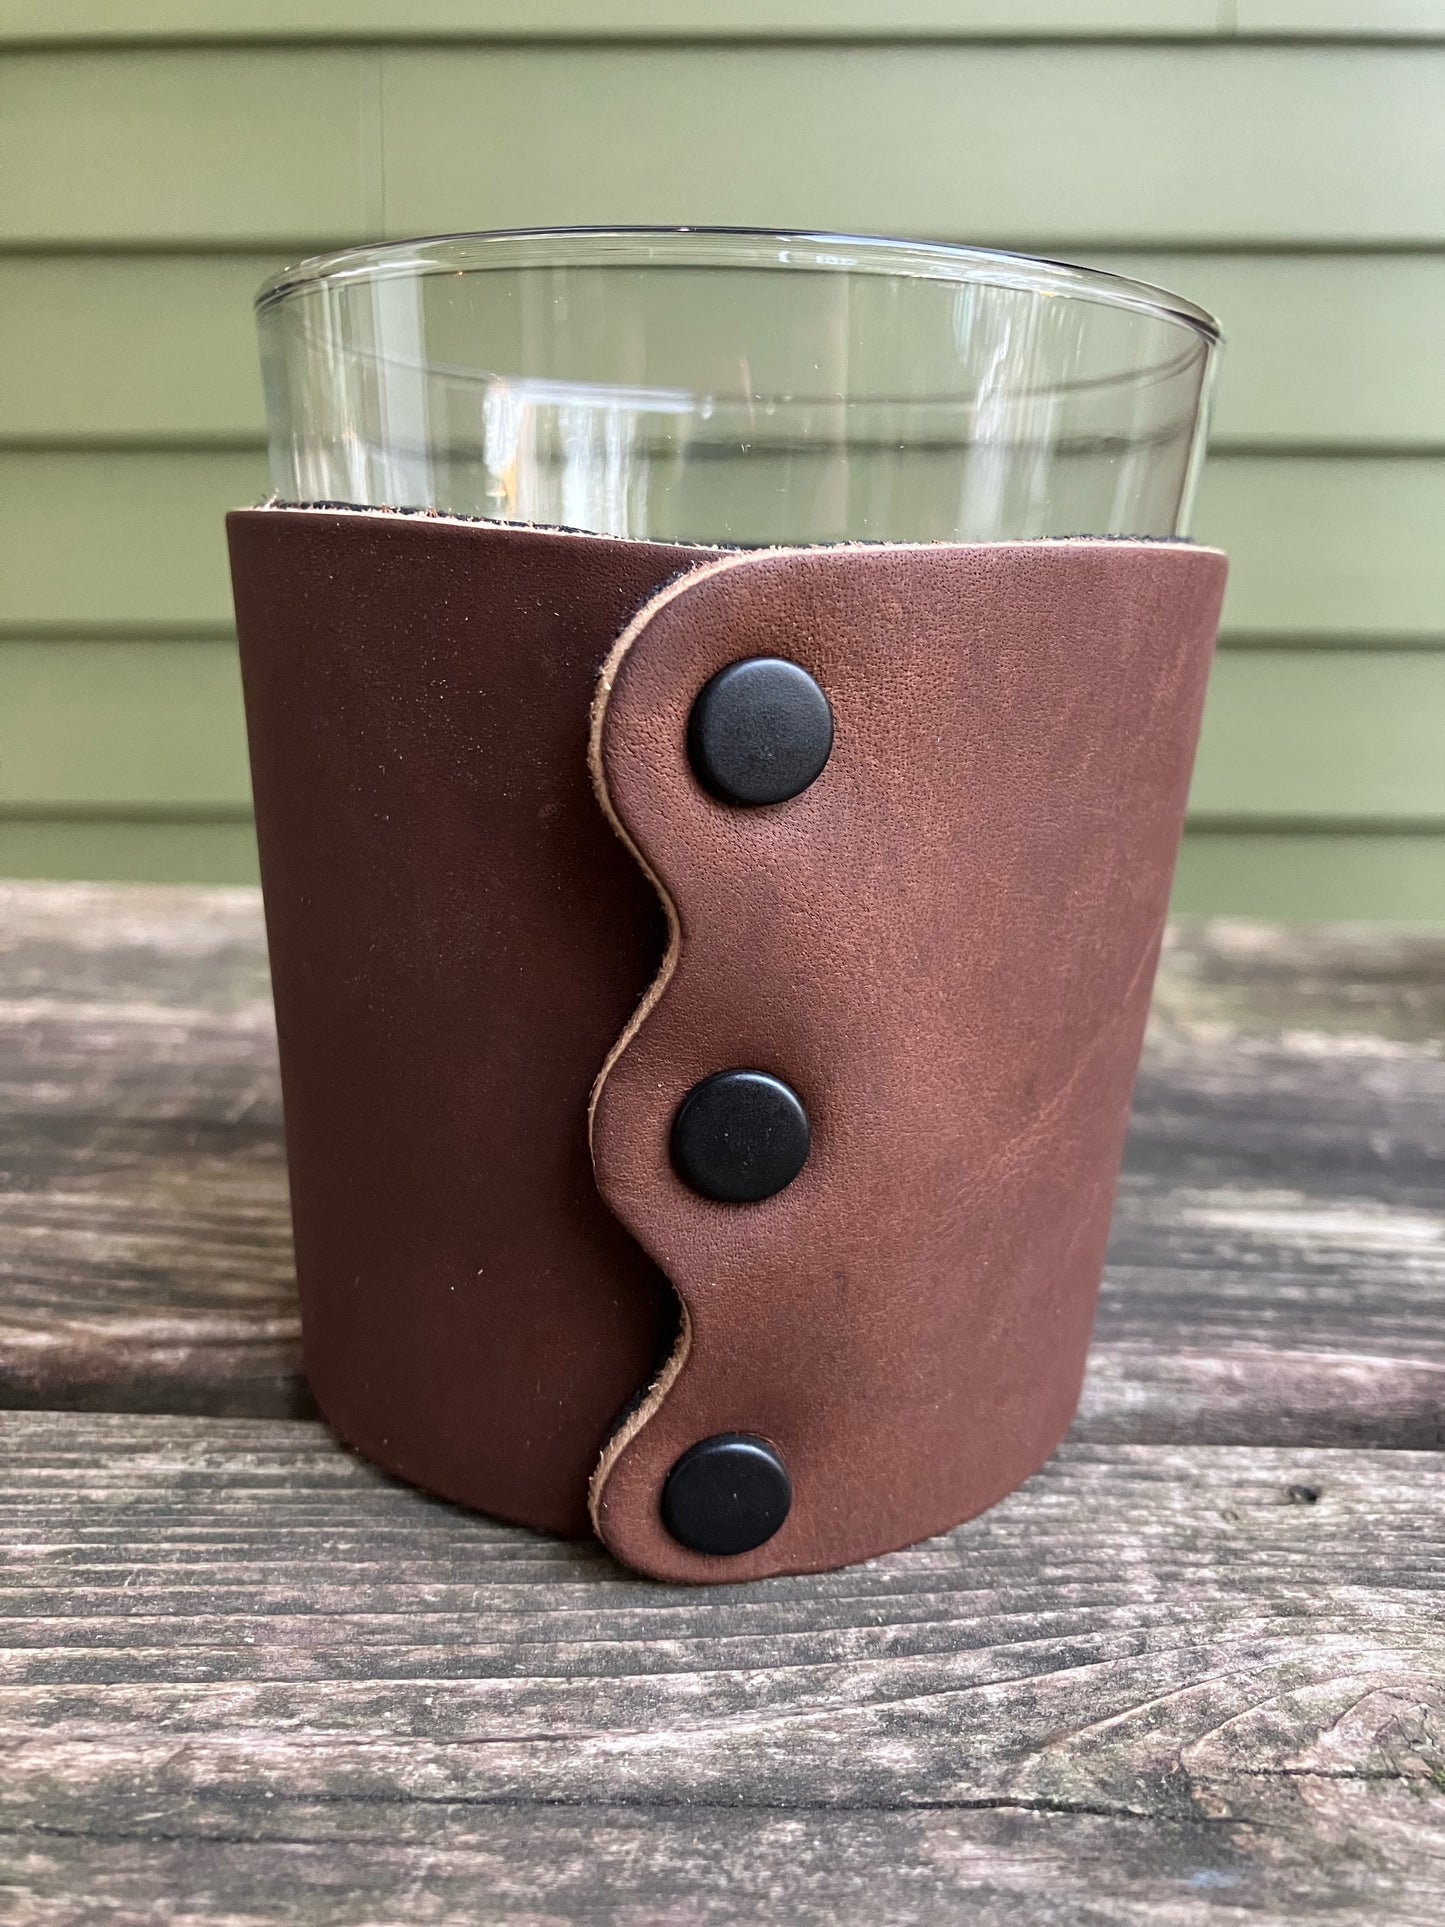 Leather Wrapped Whiskey Glass - You Look Like I Need A Drink